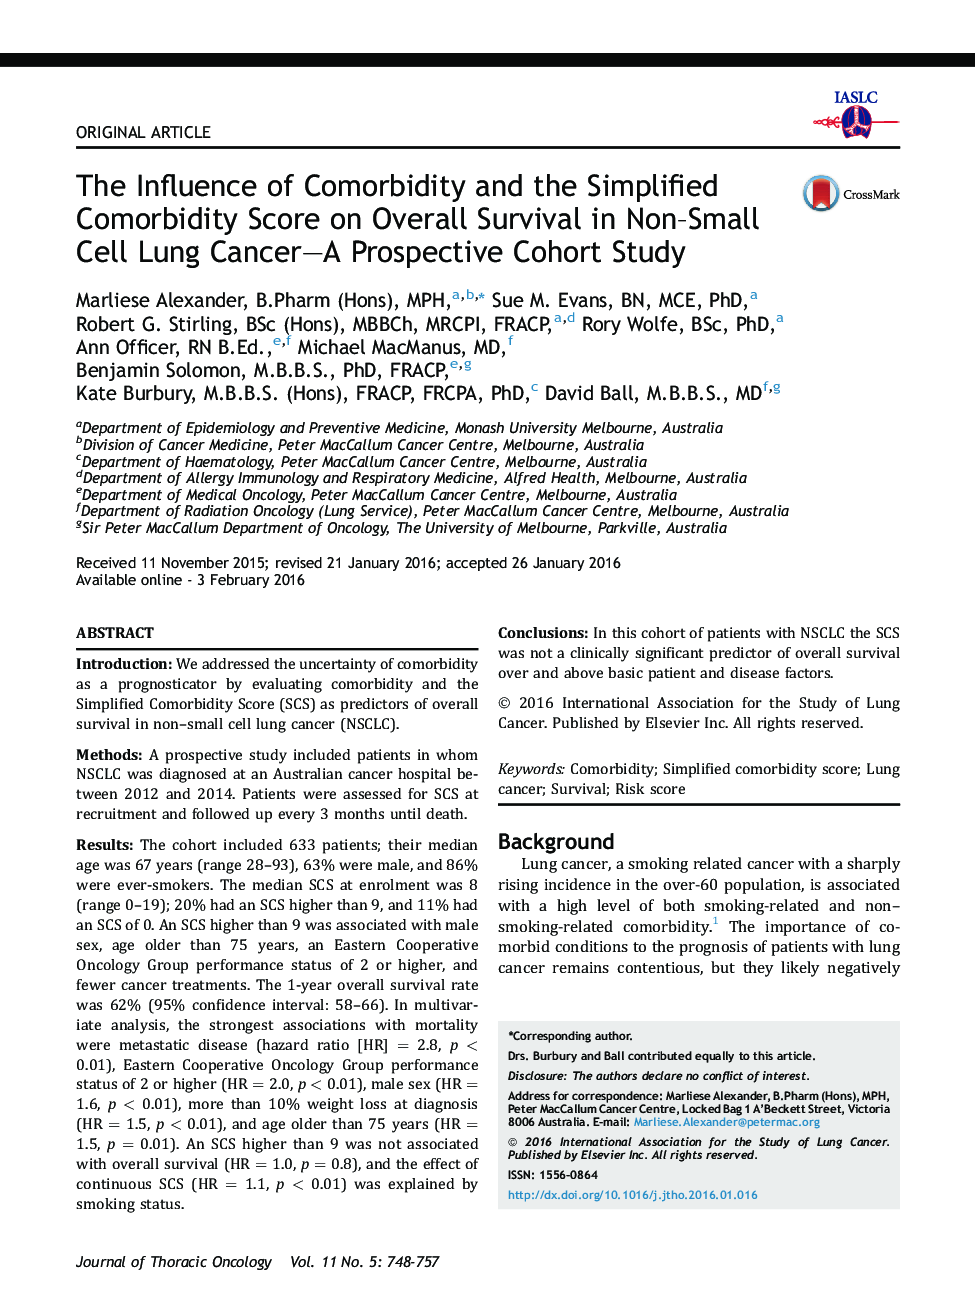 The Influence of Comorbidity and the Simplified Comorbidity Score on Overall Survival in Non-Small Cell Lung Cancer-A Prospective Cohort Study